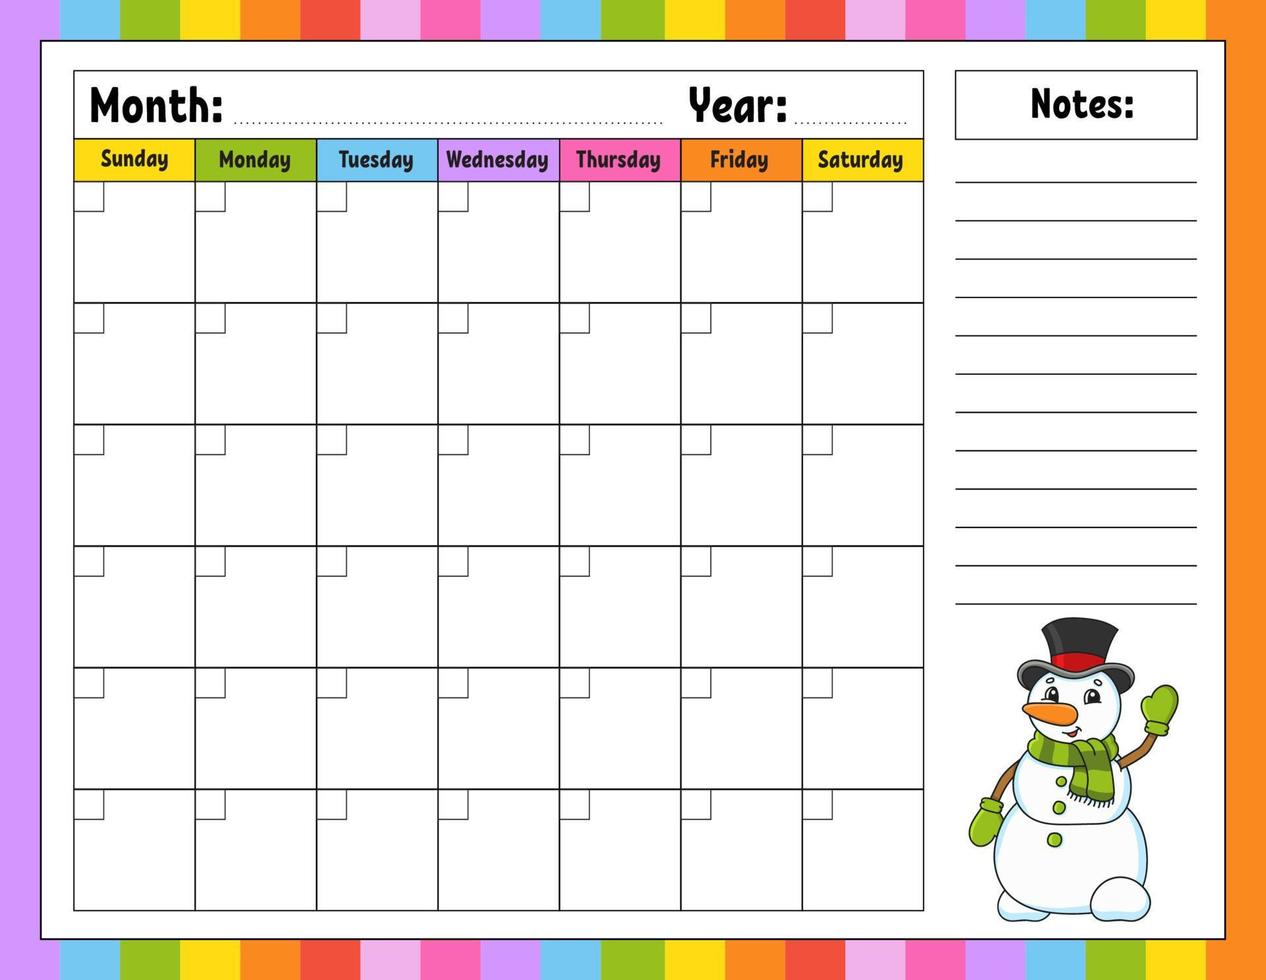 Blank calendar template for one month without dates. Colorful design with a cute character. Vector illustration.